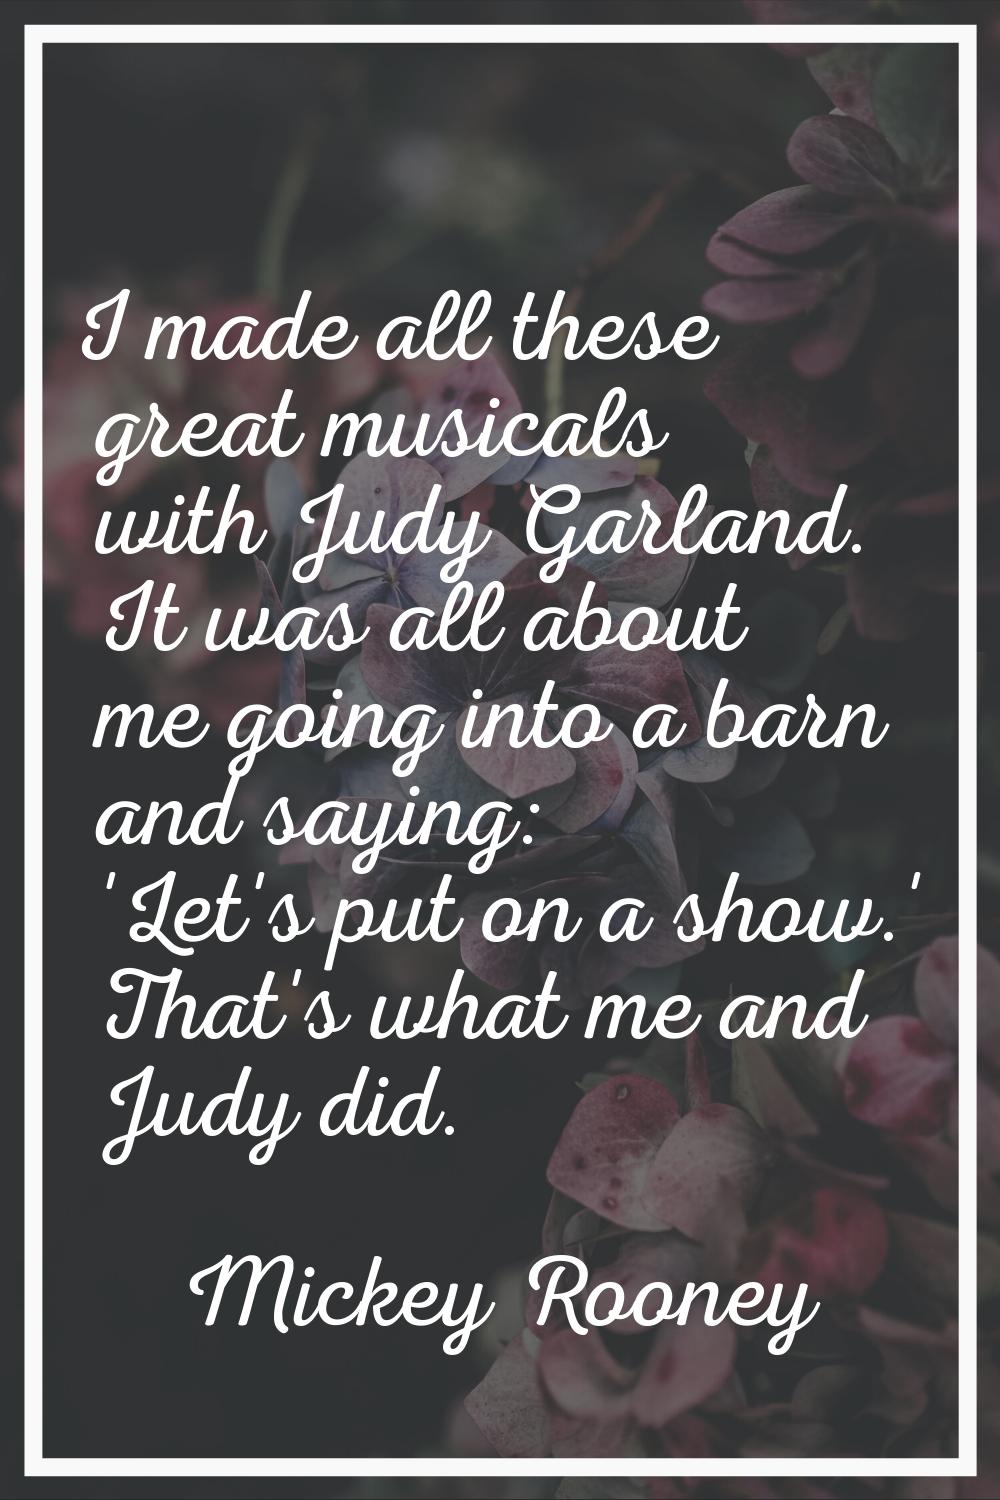 I made all these great musicals with Judy Garland. It was all about me going into a barn and saying